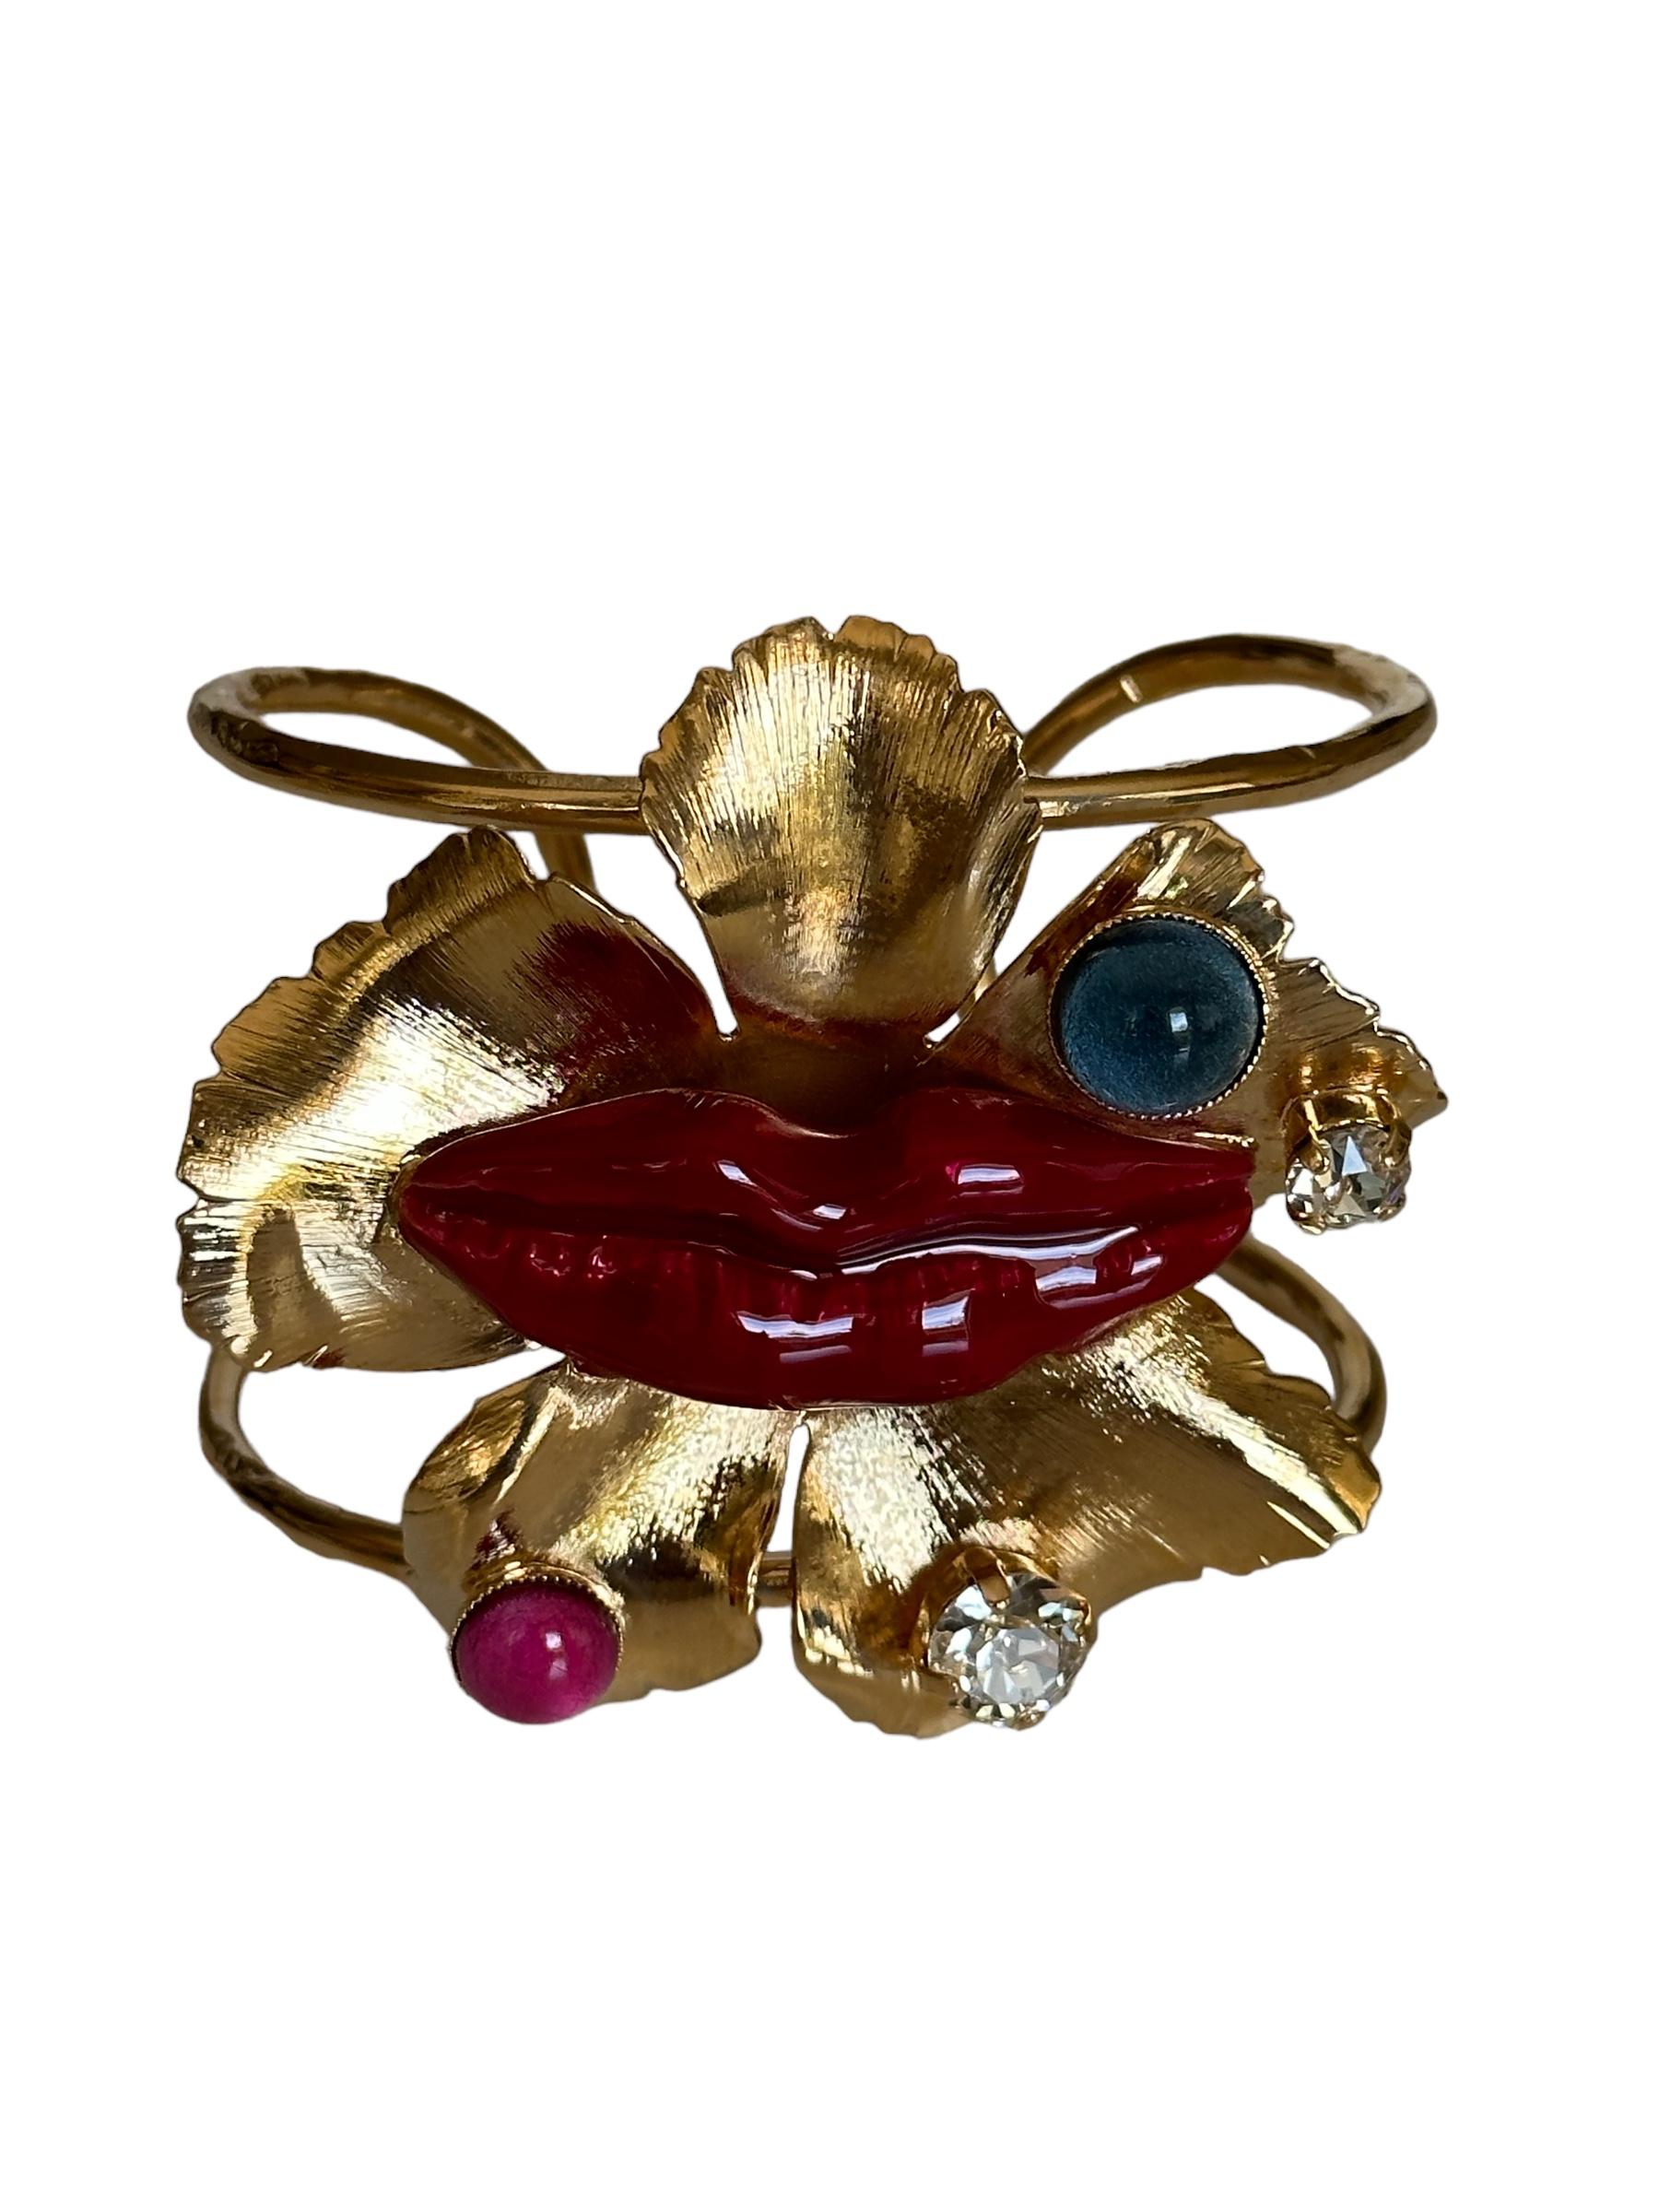 Dali collection:
A nod to the master of surrealism and his elegant mustaches. Melting shapes, birds in flight and lacquered mouths express the passion and creative madness of the Spanish artist.
Cuff is flexible and adjustable to most wrist